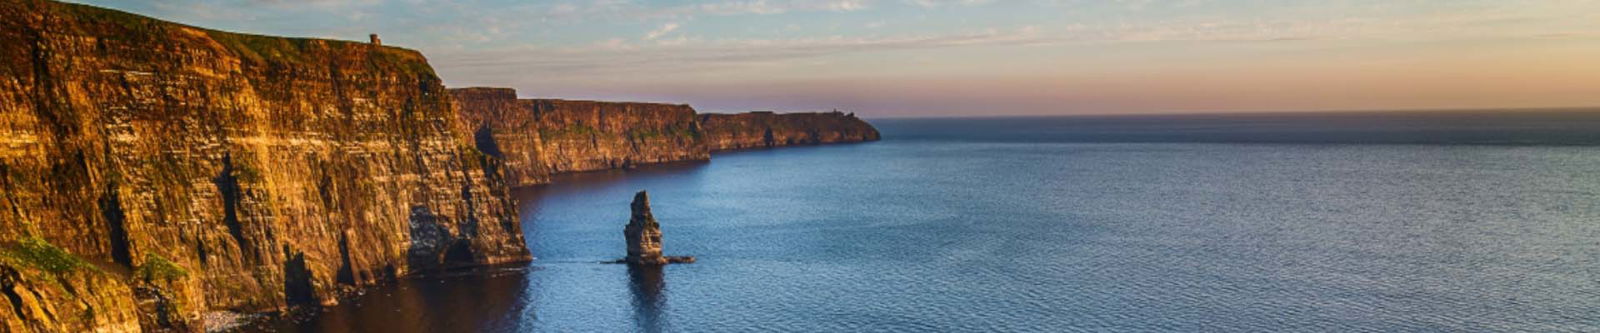 rent a car to tour the west of ireland and cliffs of moher